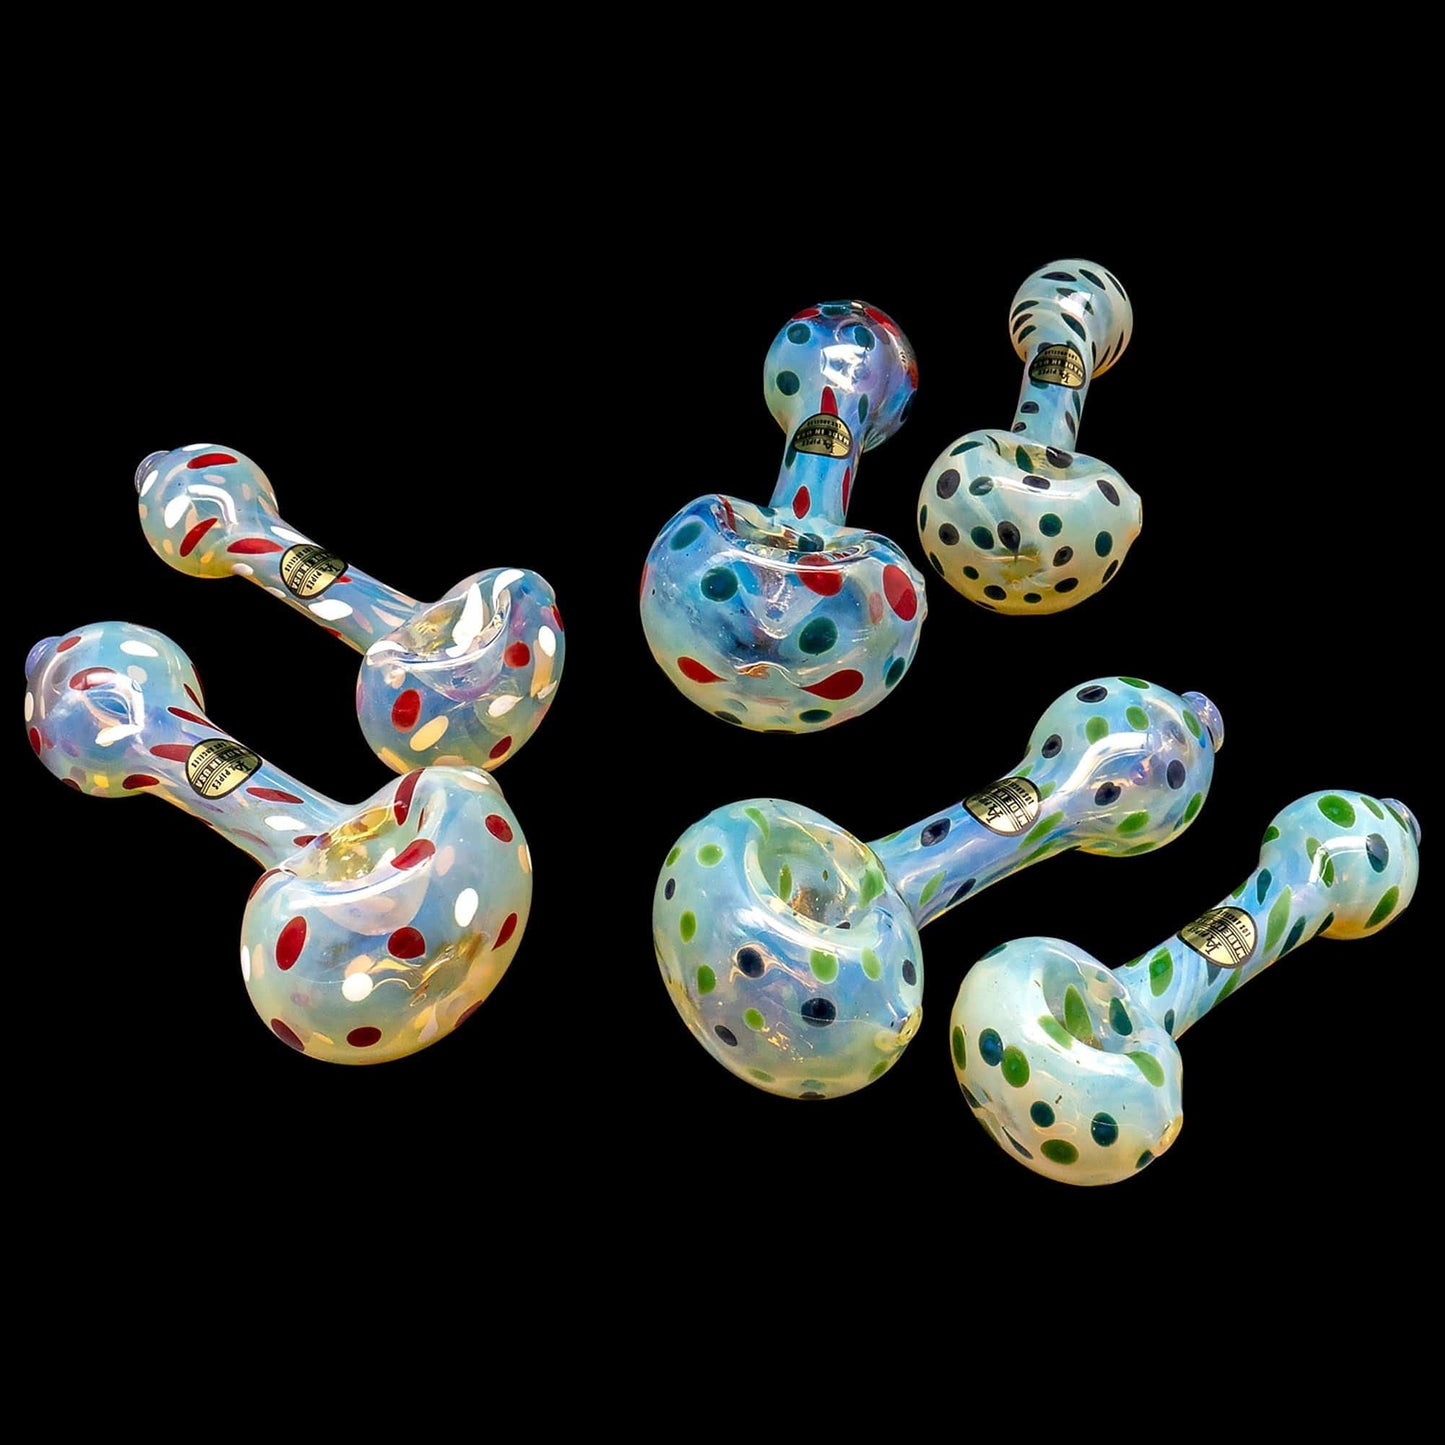 LA Pipes Hand Pipe Mix Color / 3.5 Inch "Polka Dot" Glass Spoon Pipe